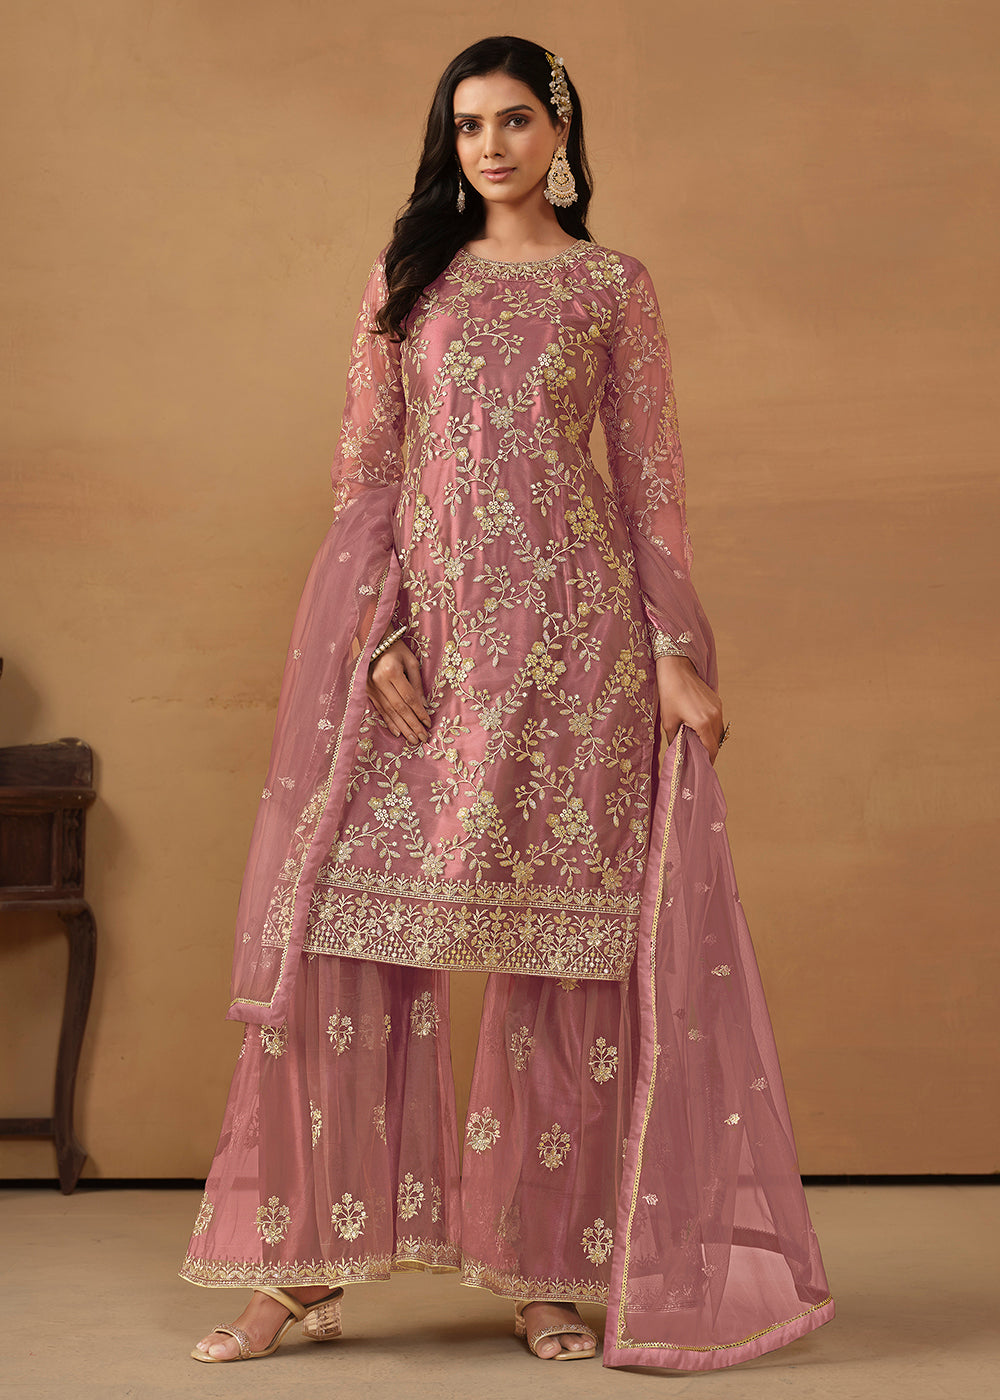 Shop Now Old Rose Net Embroidered Wedding Festive Gharara Suit Online at Empress Clothing in USA, UK, Canada, Italy & Worldwide.'